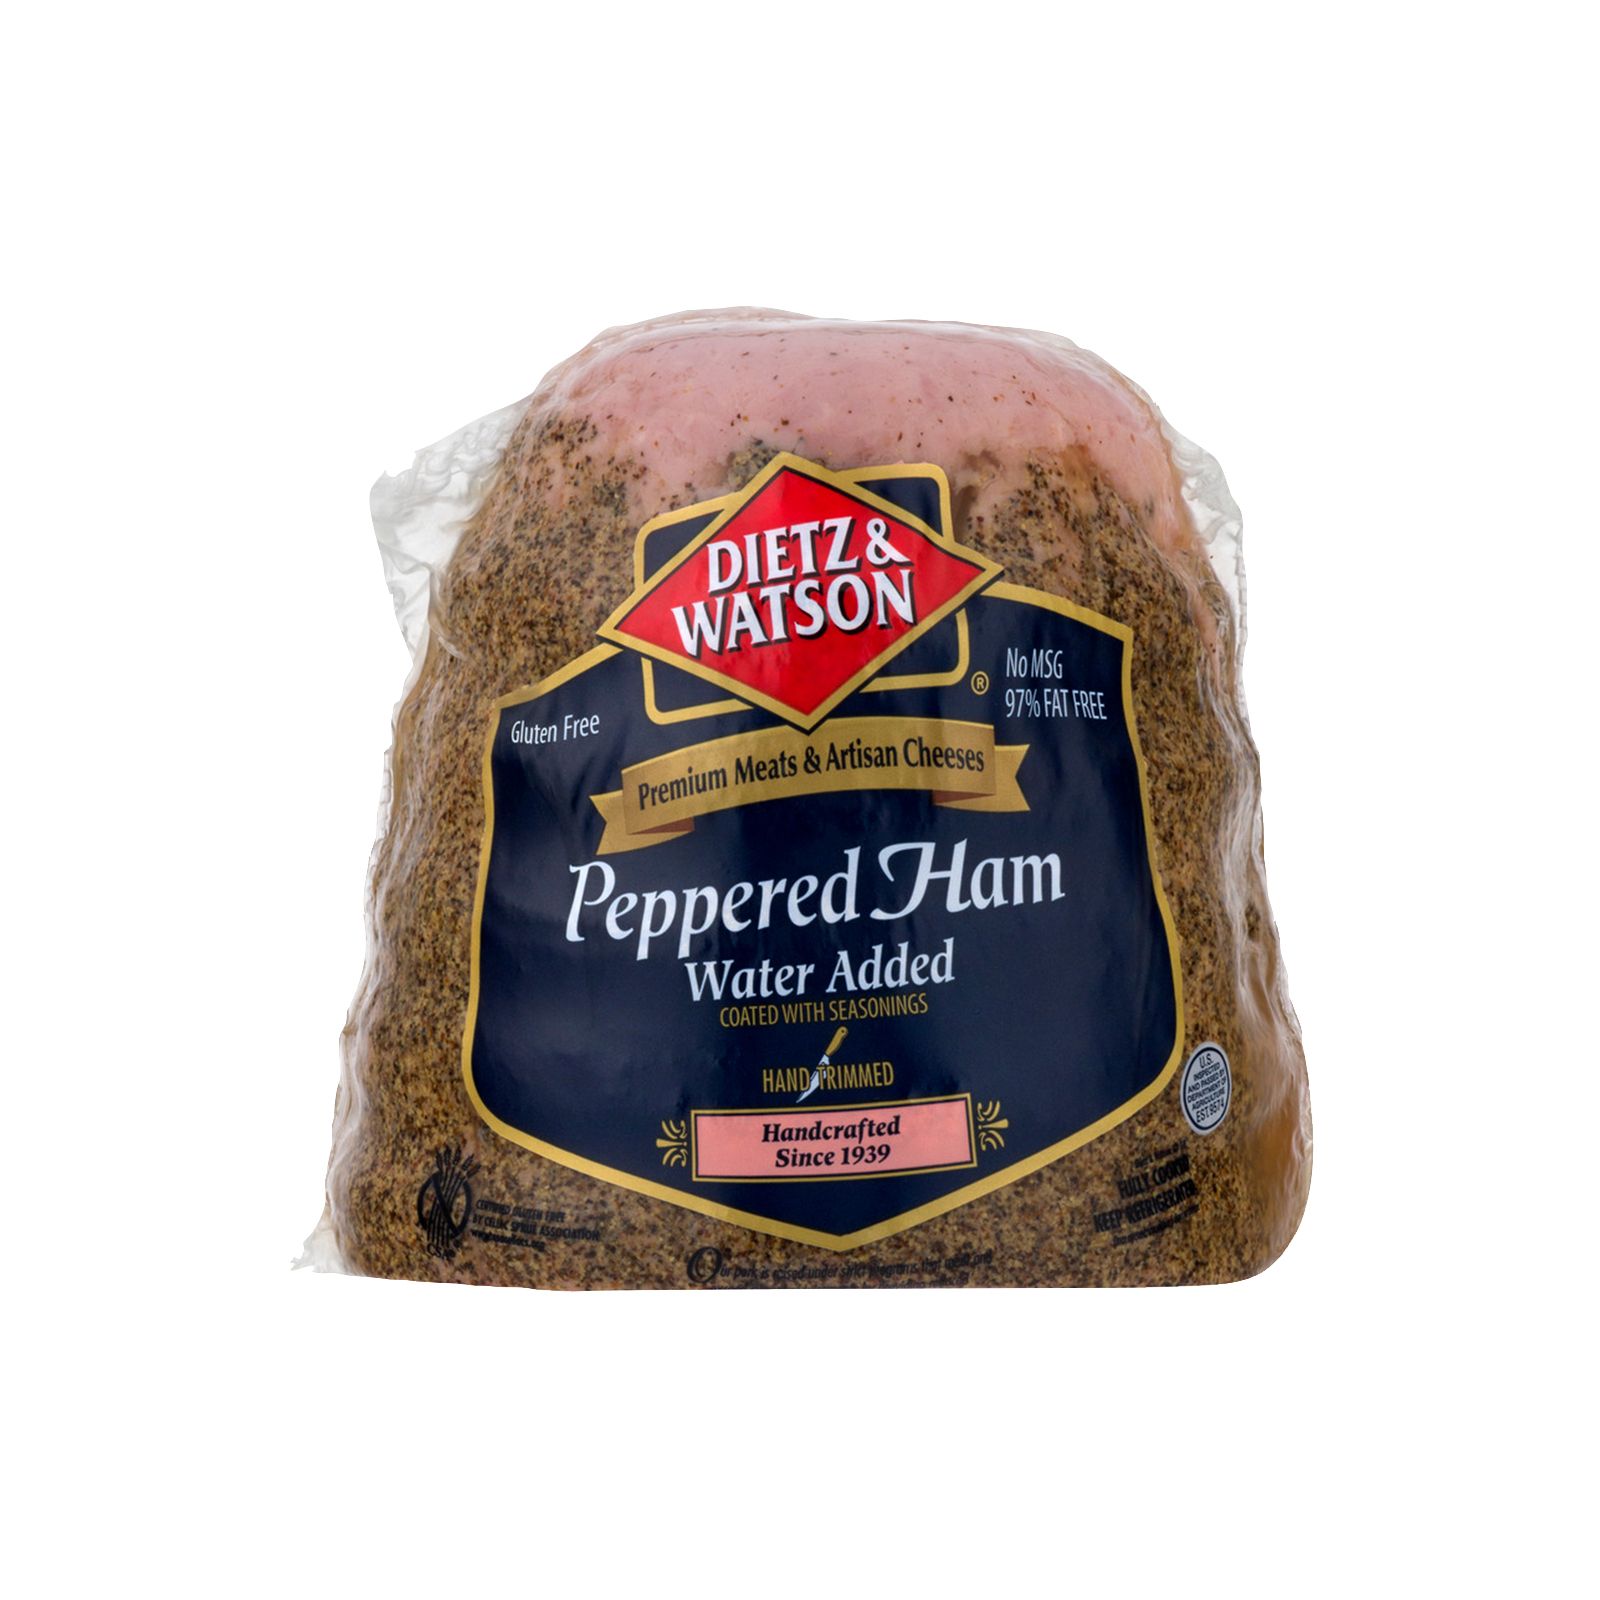 Cooked Peppered Ham, 0.75-1.5 lb Standard Cut